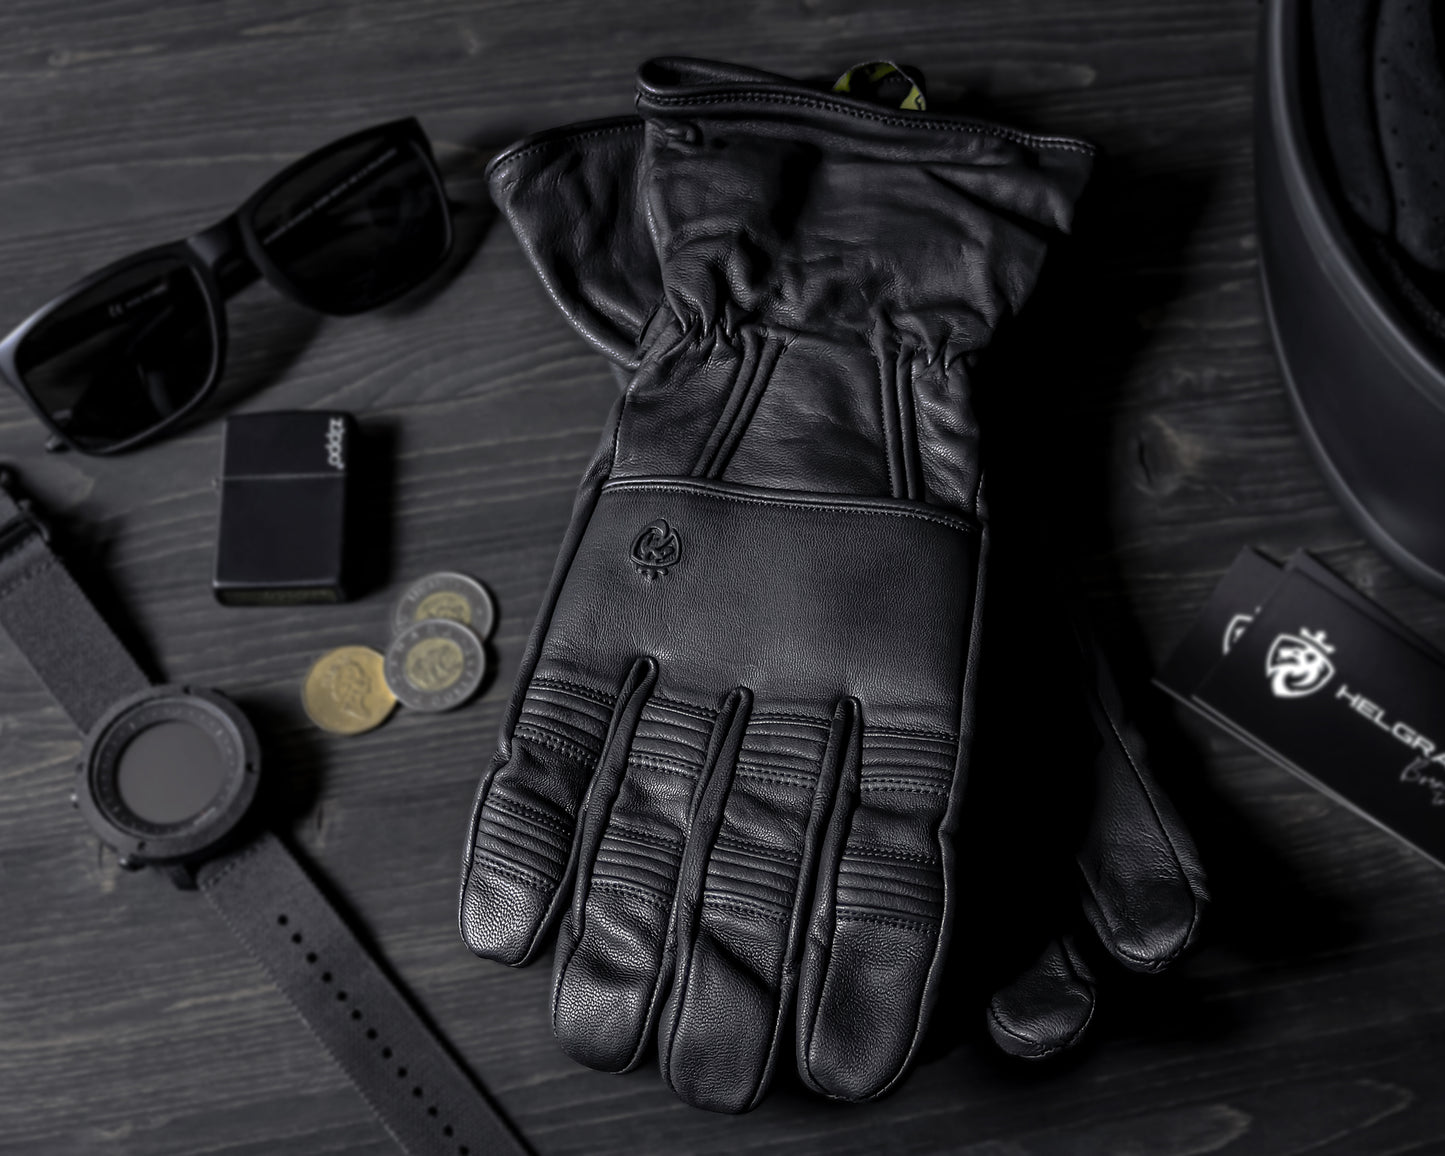 Hopper Water Resistant Leather Glove -  Black